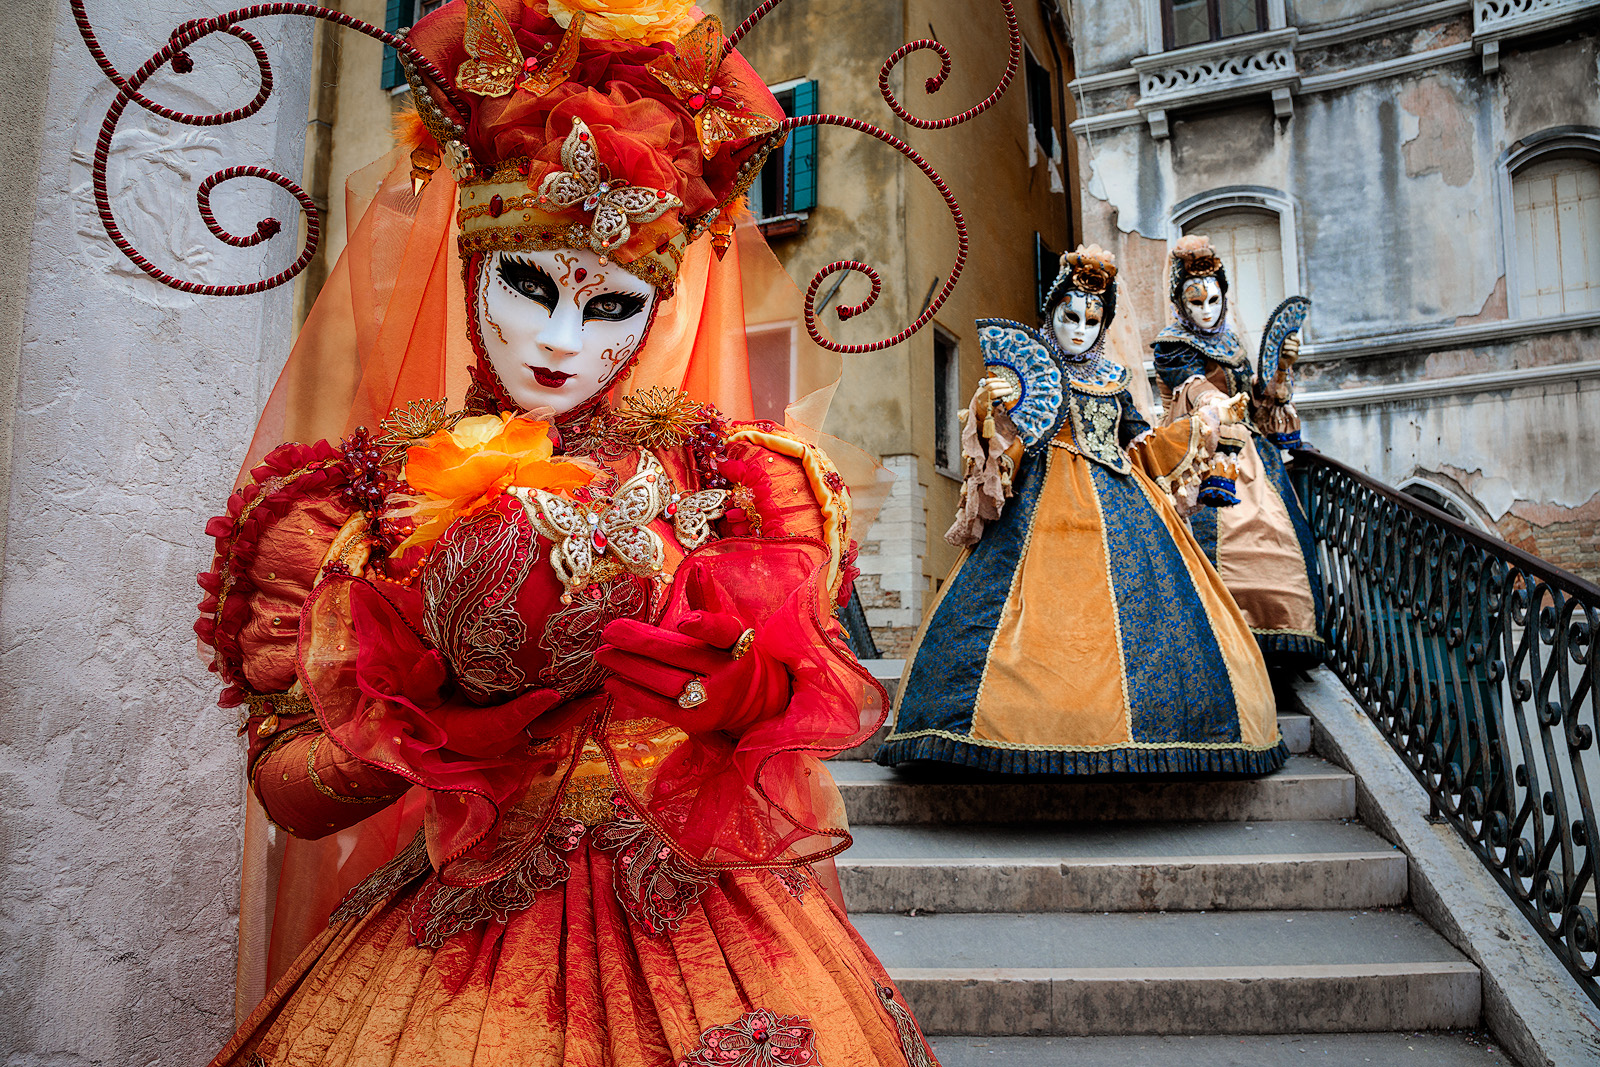 Carnival models posing on a stairway in Venice.